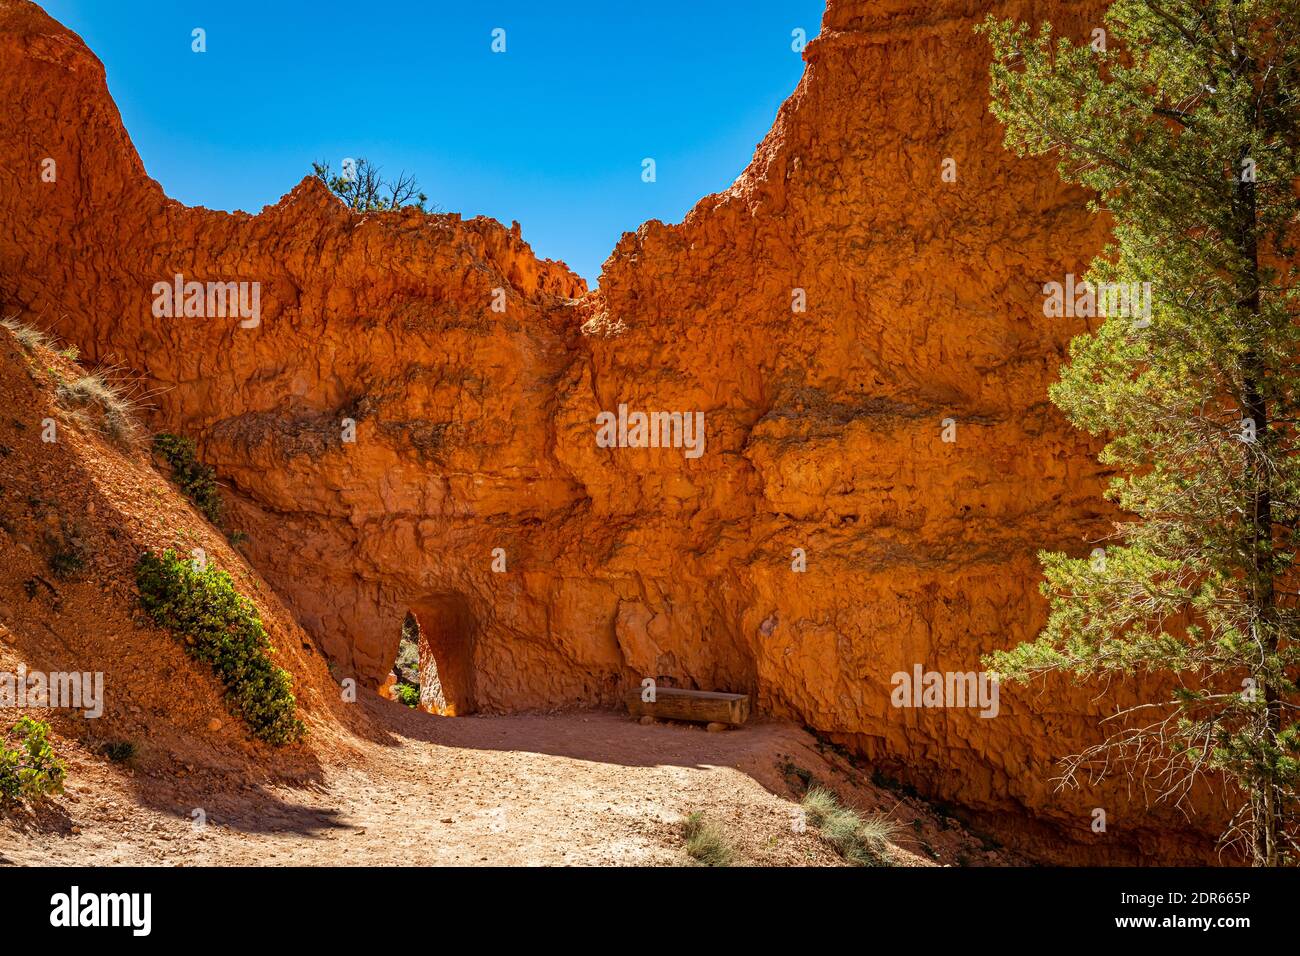 Hoodoos and eroded sandstone formations along the Queen's Garden and Navajo Loop hiking trails at Bryce Canyon National Park in Utah. Stock Photo